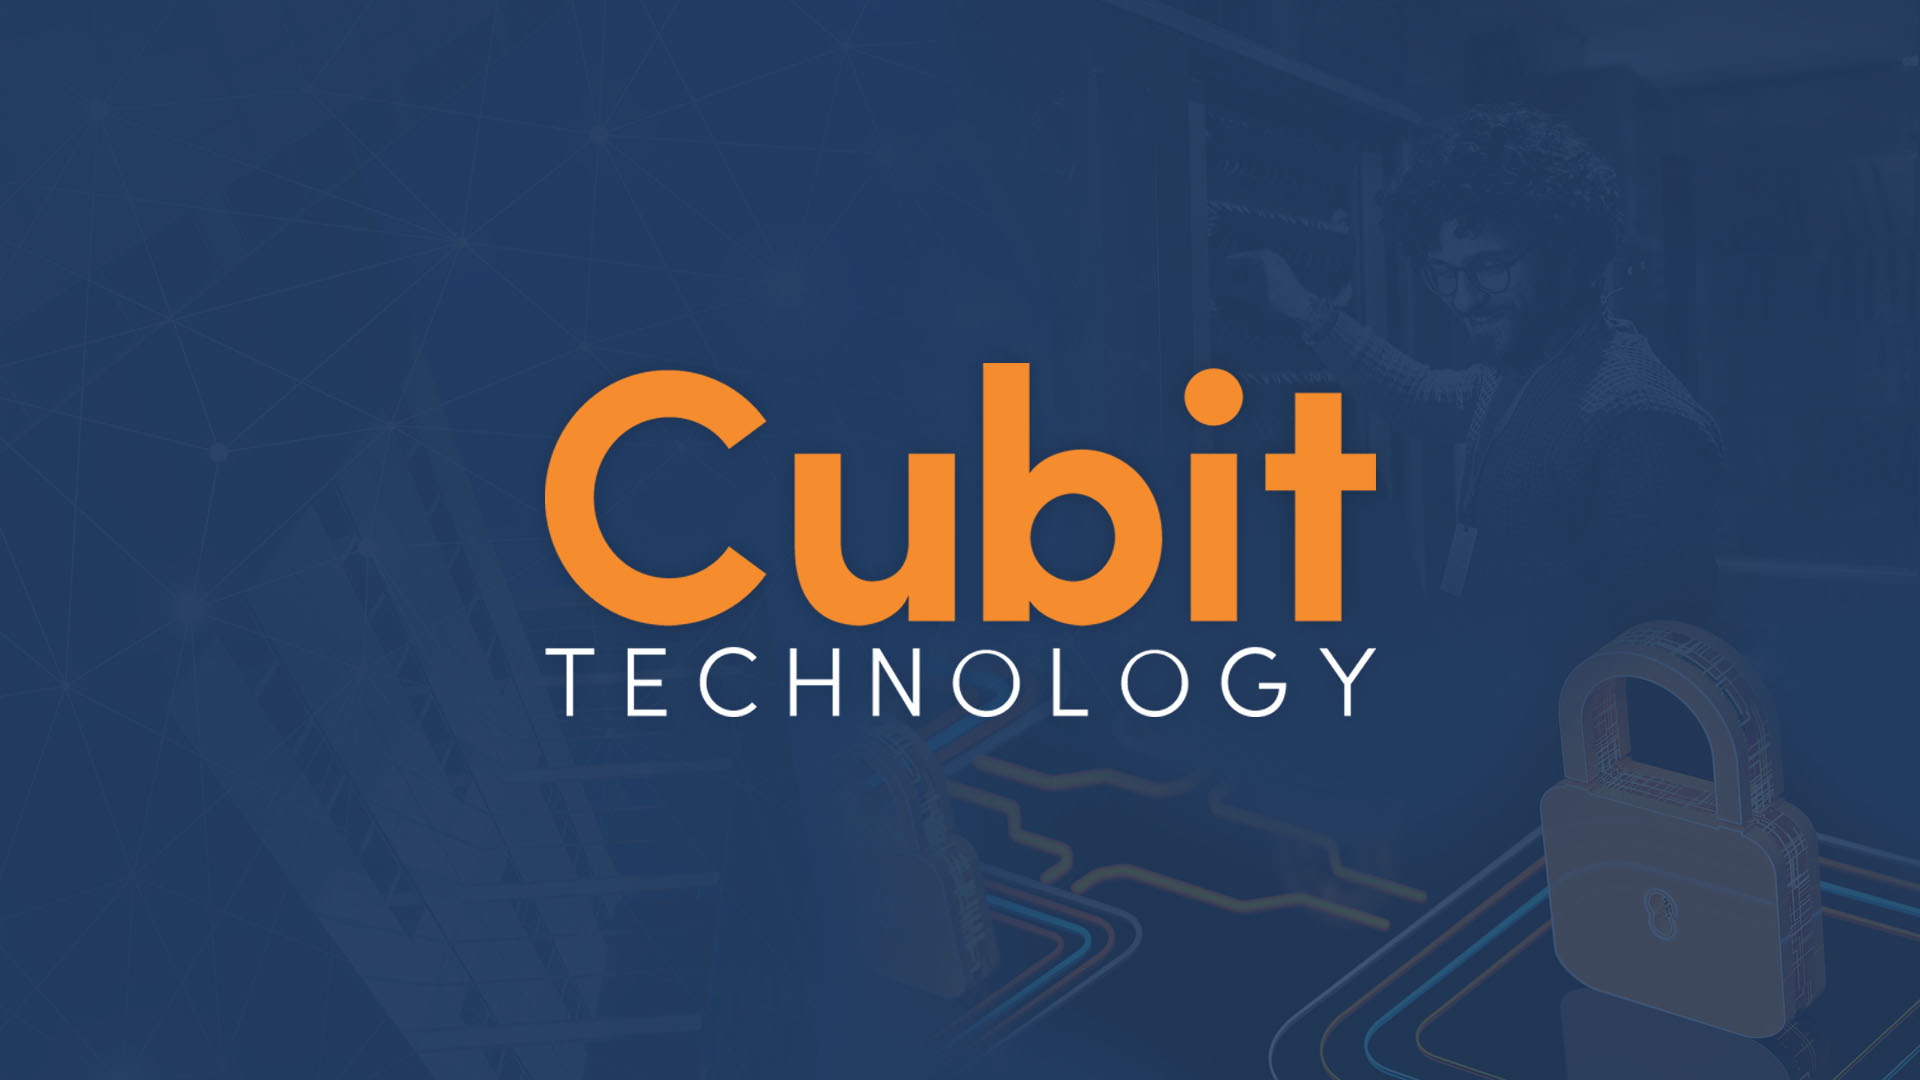 Cubit Technology outsourced IT Support London